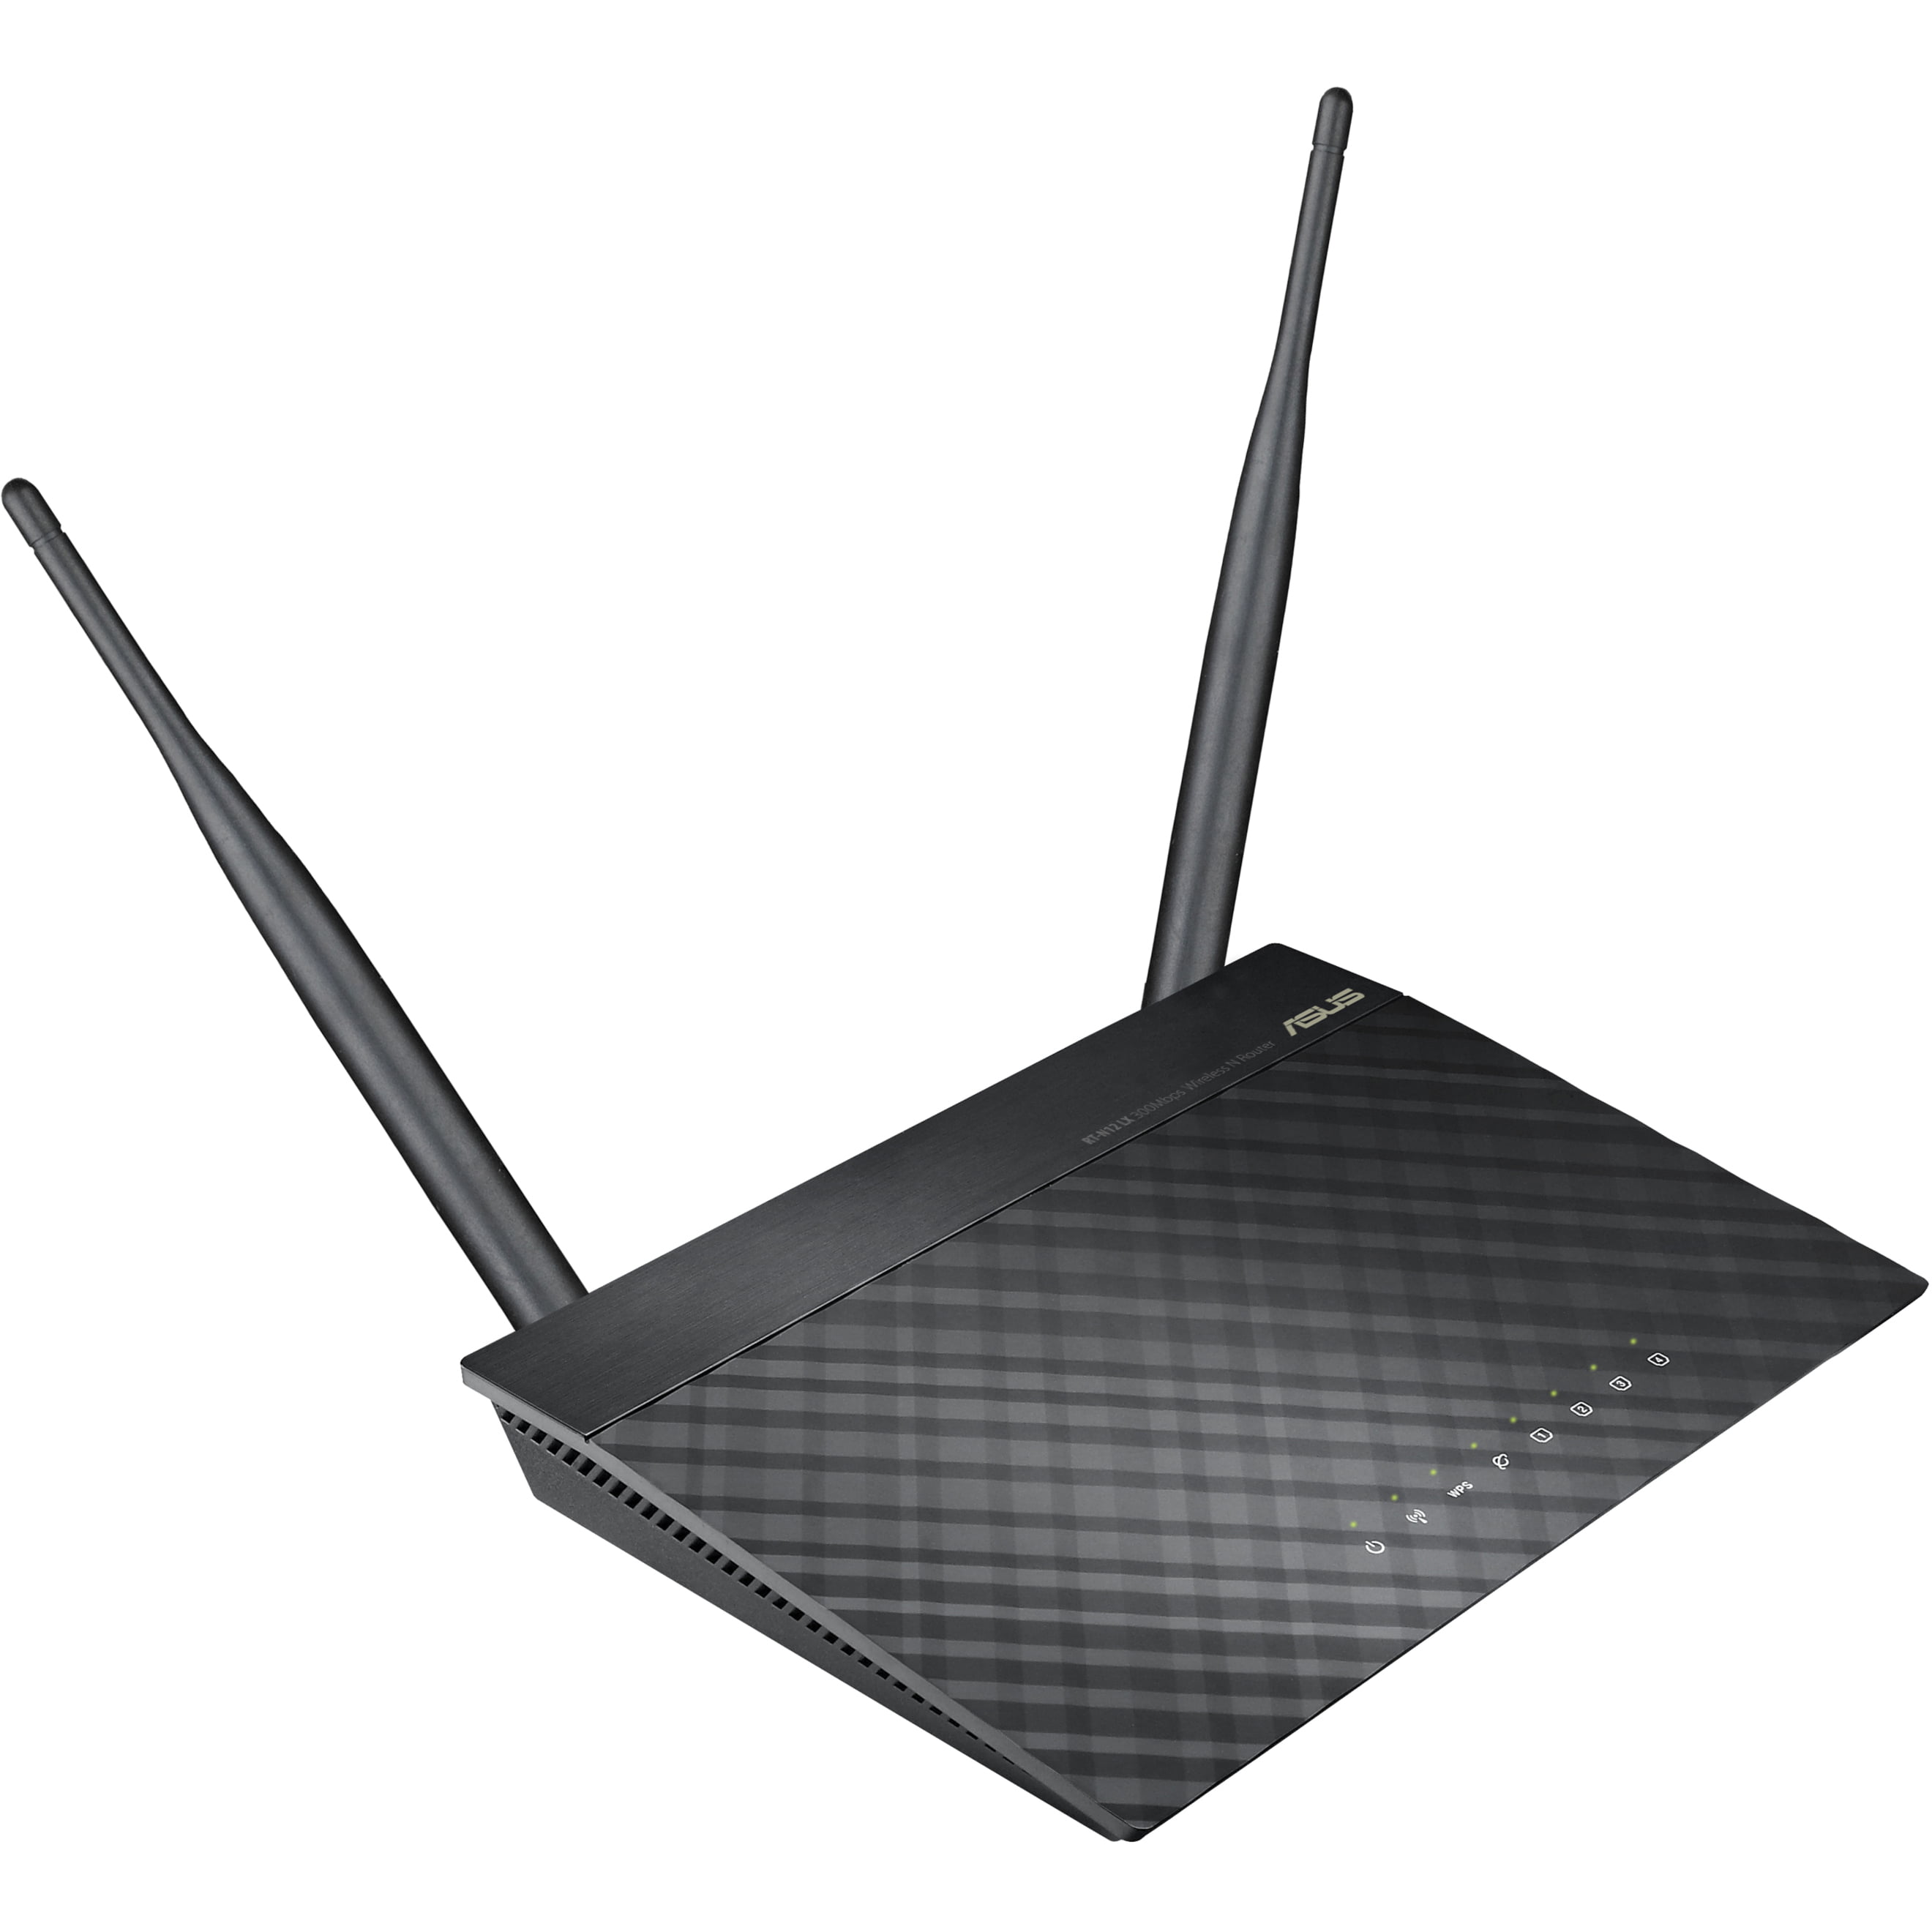 Onvervangbaar levend faillissement ASUS N300 WiFi Router (RT-N12_D1) - 3 in 1 Wireless Internet Router/Access  Point/Range Extender, 2T2R MIMO Technology, Gaming & Streaming, Easy Setup  - Walmart.com